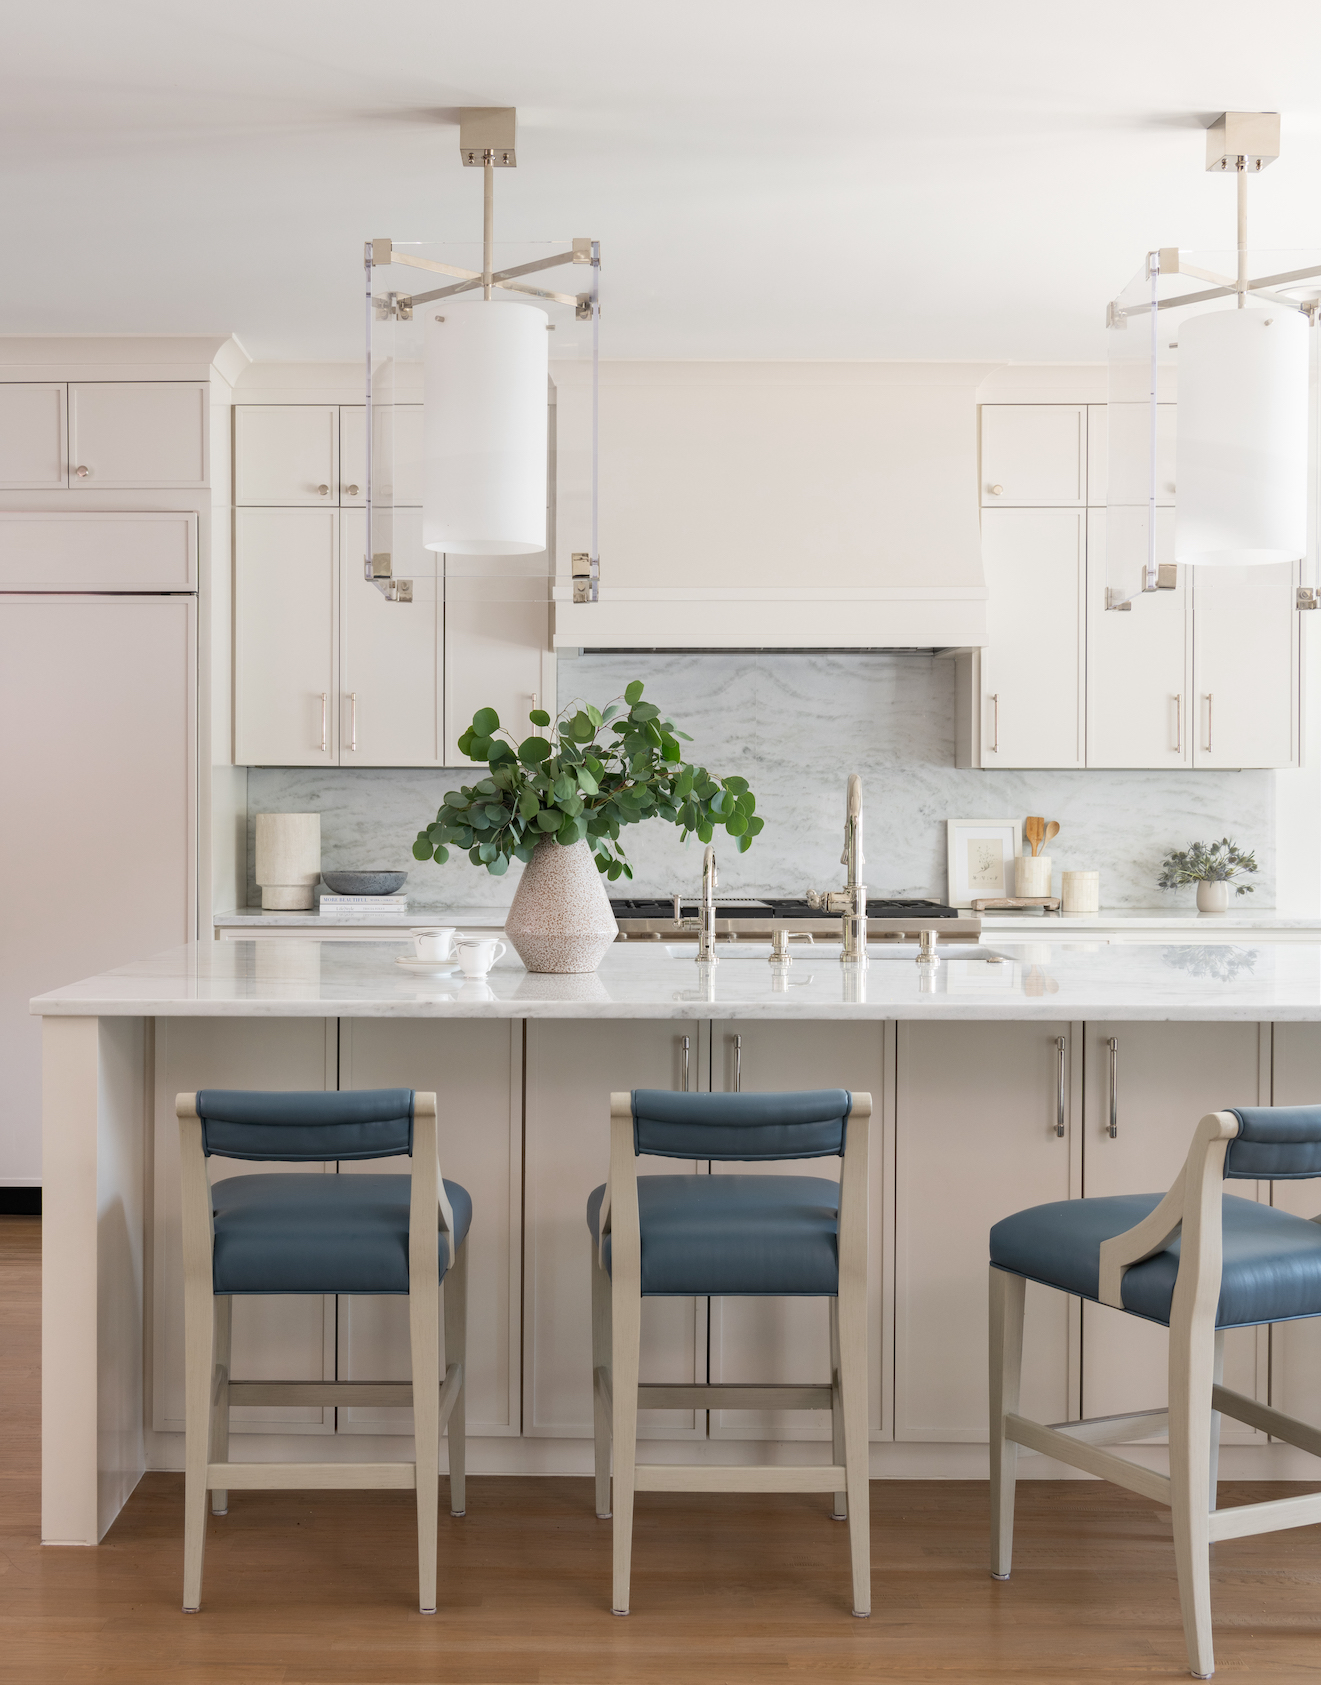 A kitchen with white cabinets and blue chairs.